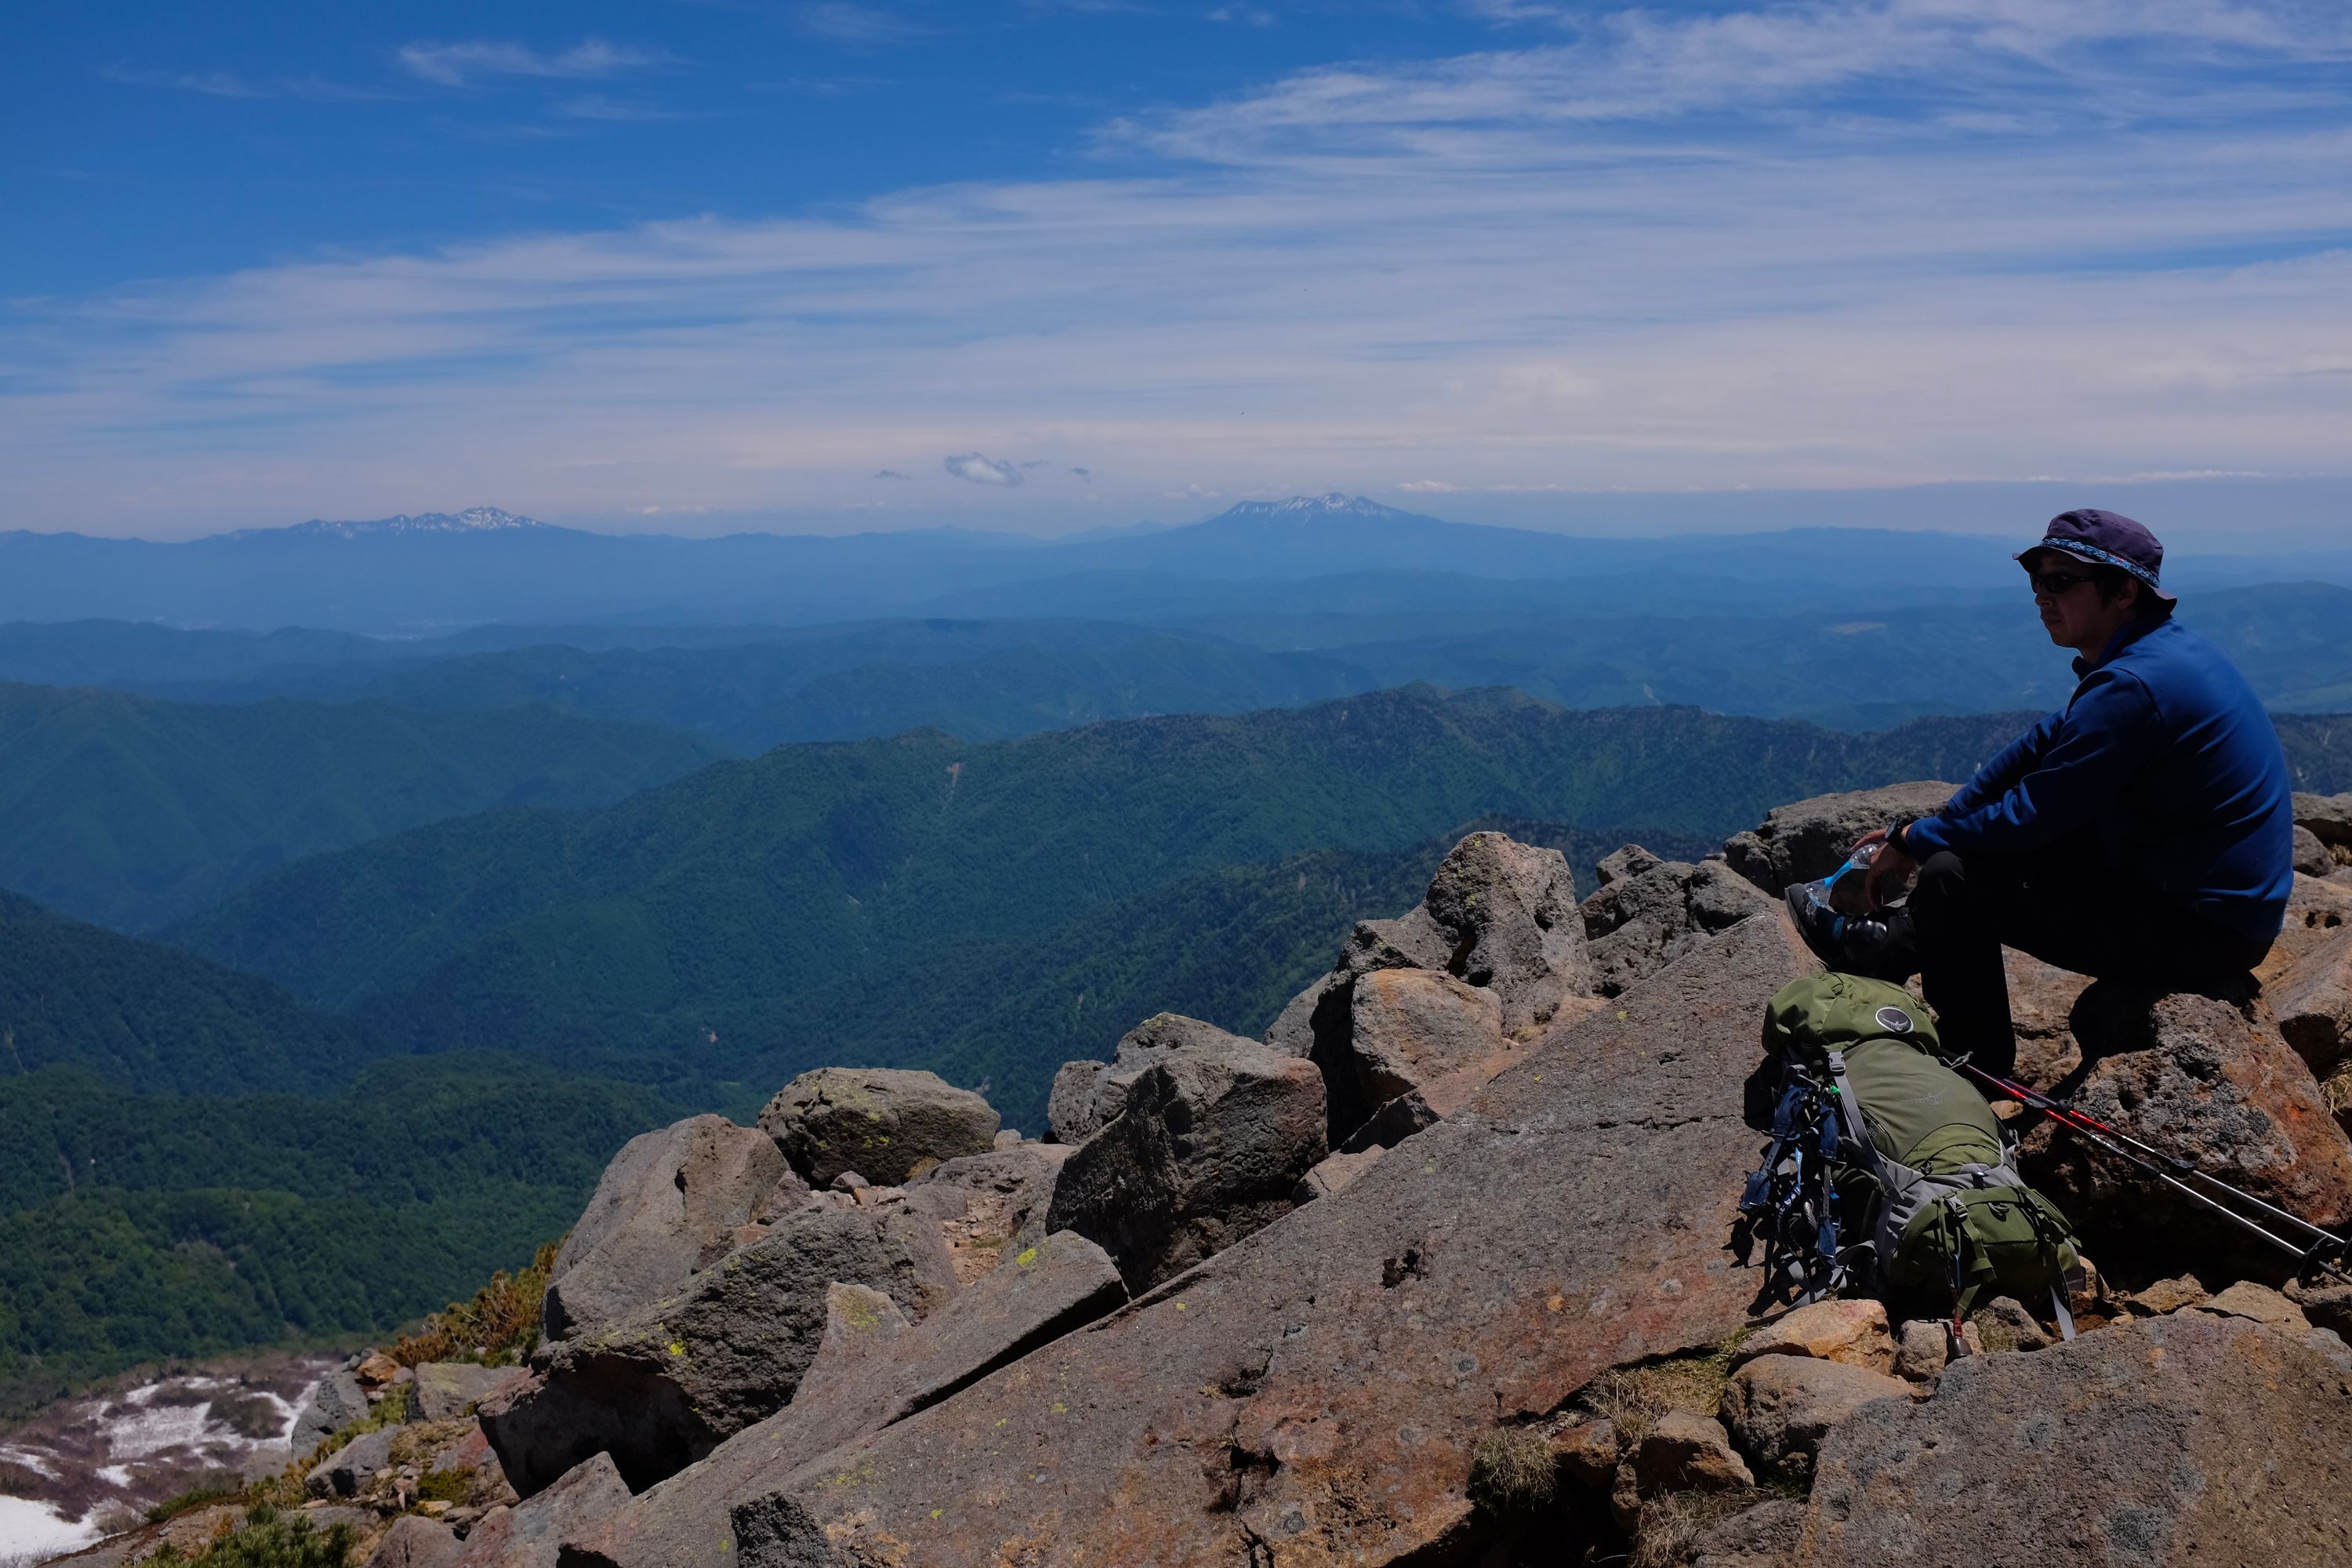 A man admires the mountain scenery from the summit of Hakusan.